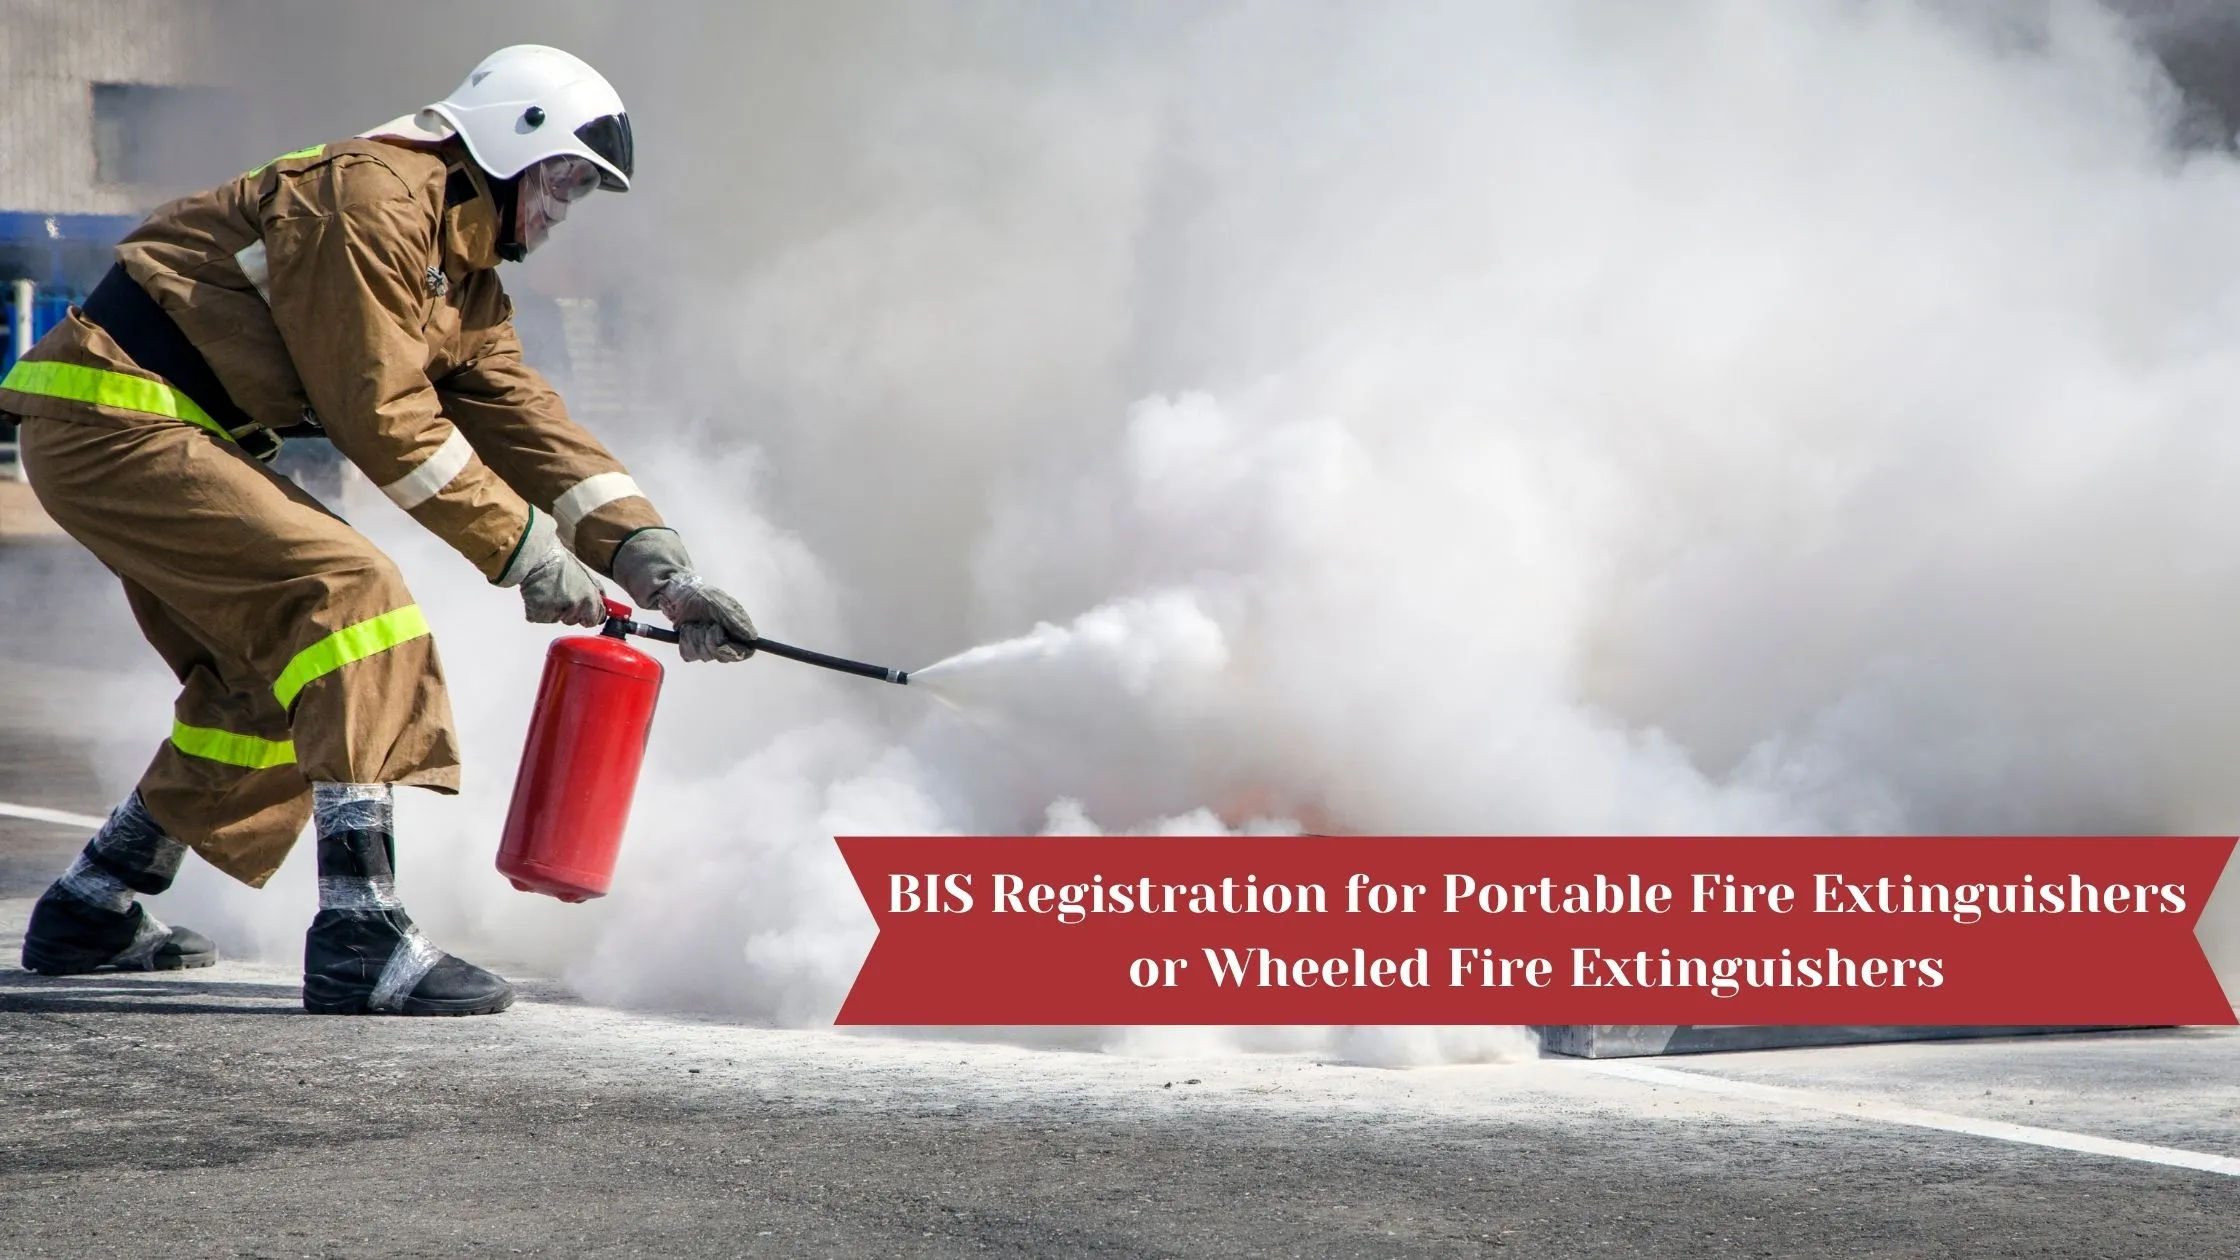 BIS Registration for Portable Fire Extinguishers or Wheeled Fire Extinguishers